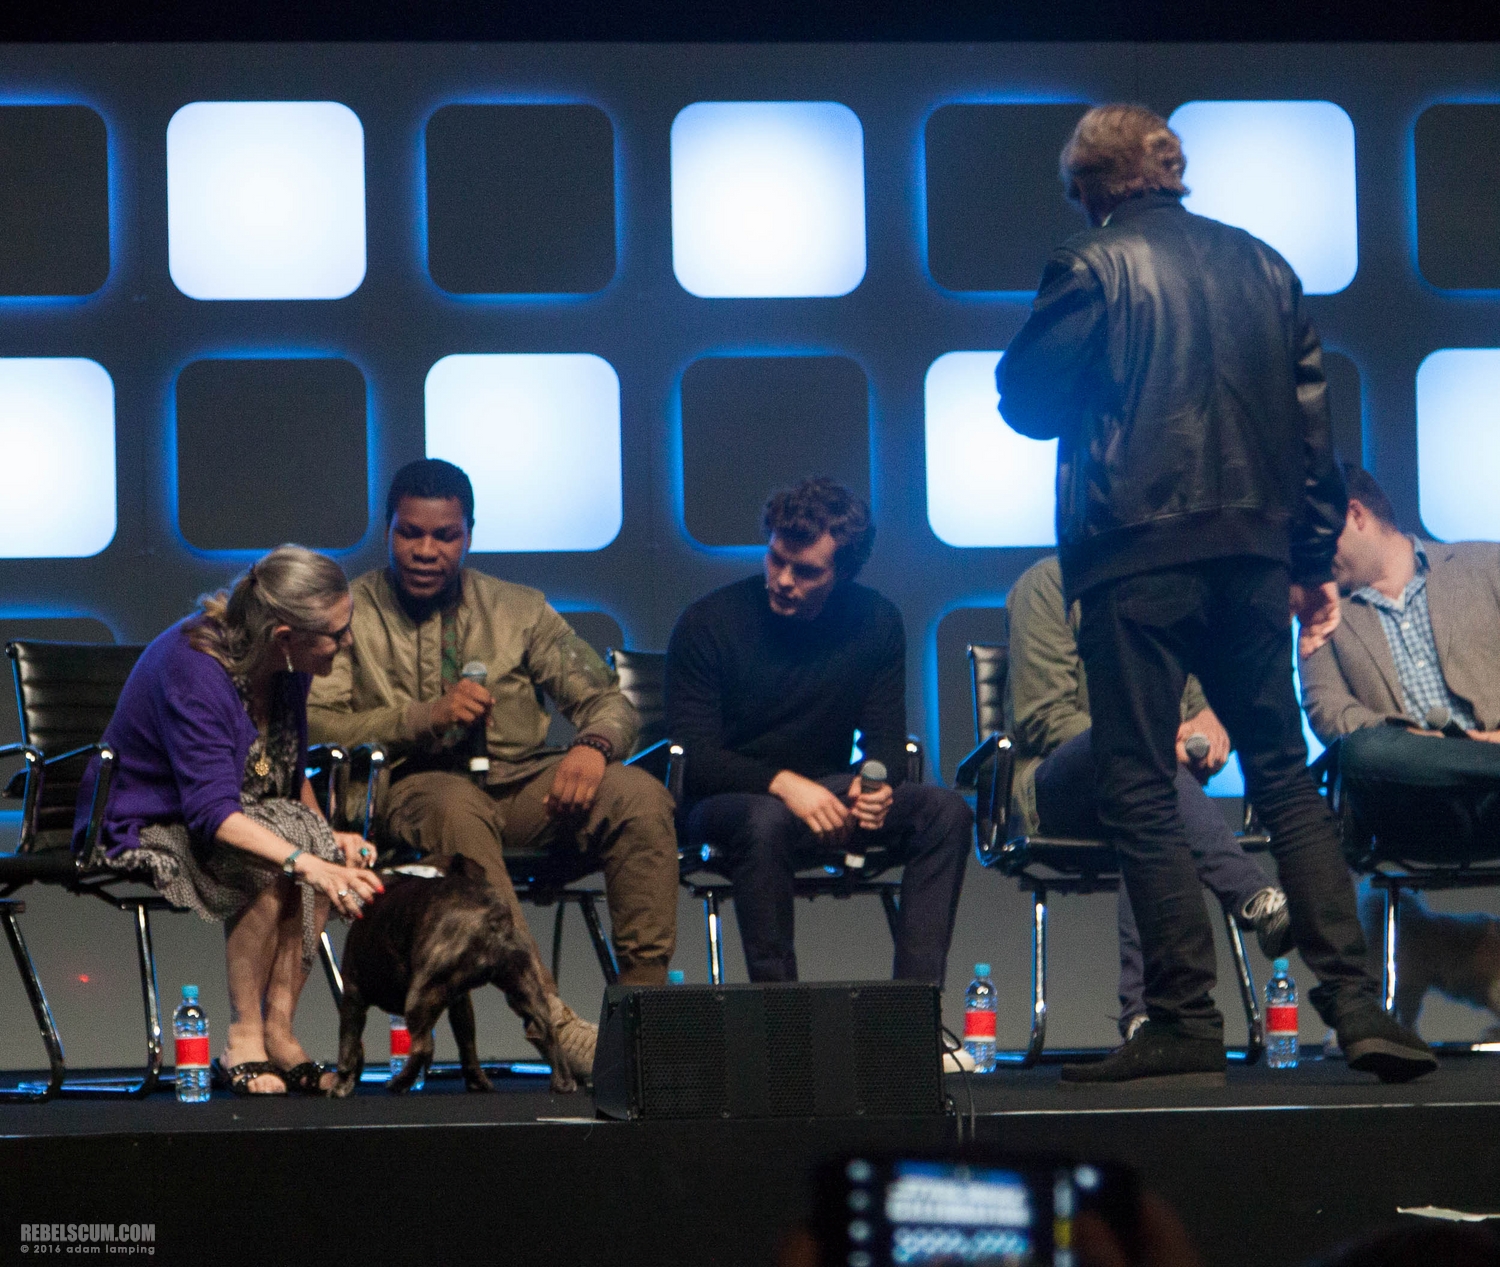 star-wars-celebration-2016-future-filmmakers-and-closing-ceremony-022.jpg